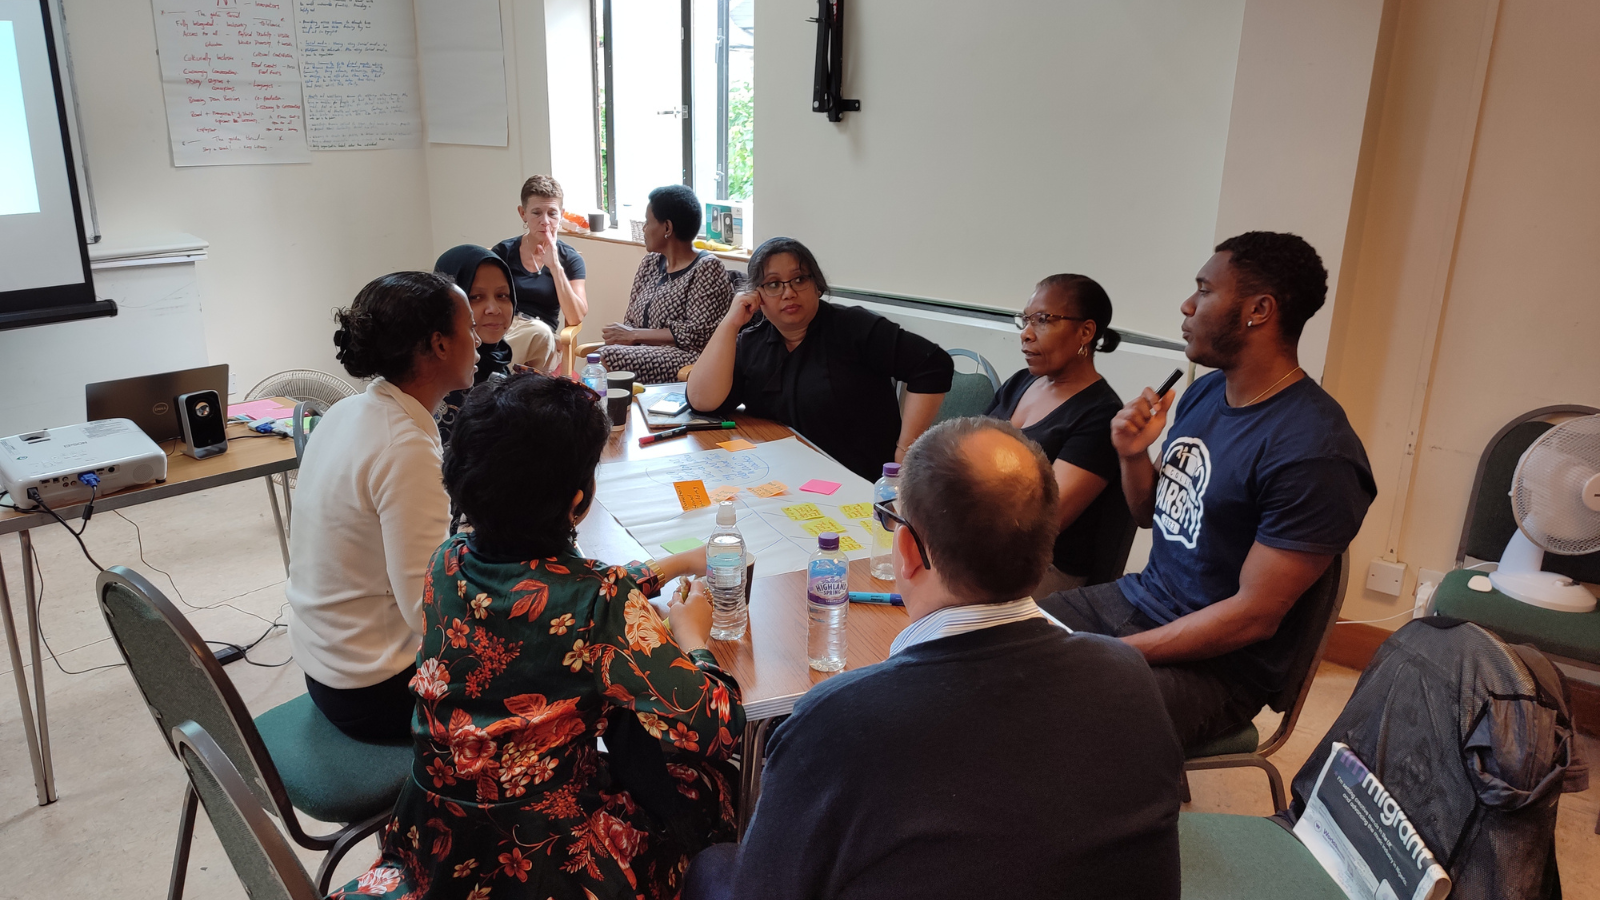 Discussing Racial Justice at the Away Day